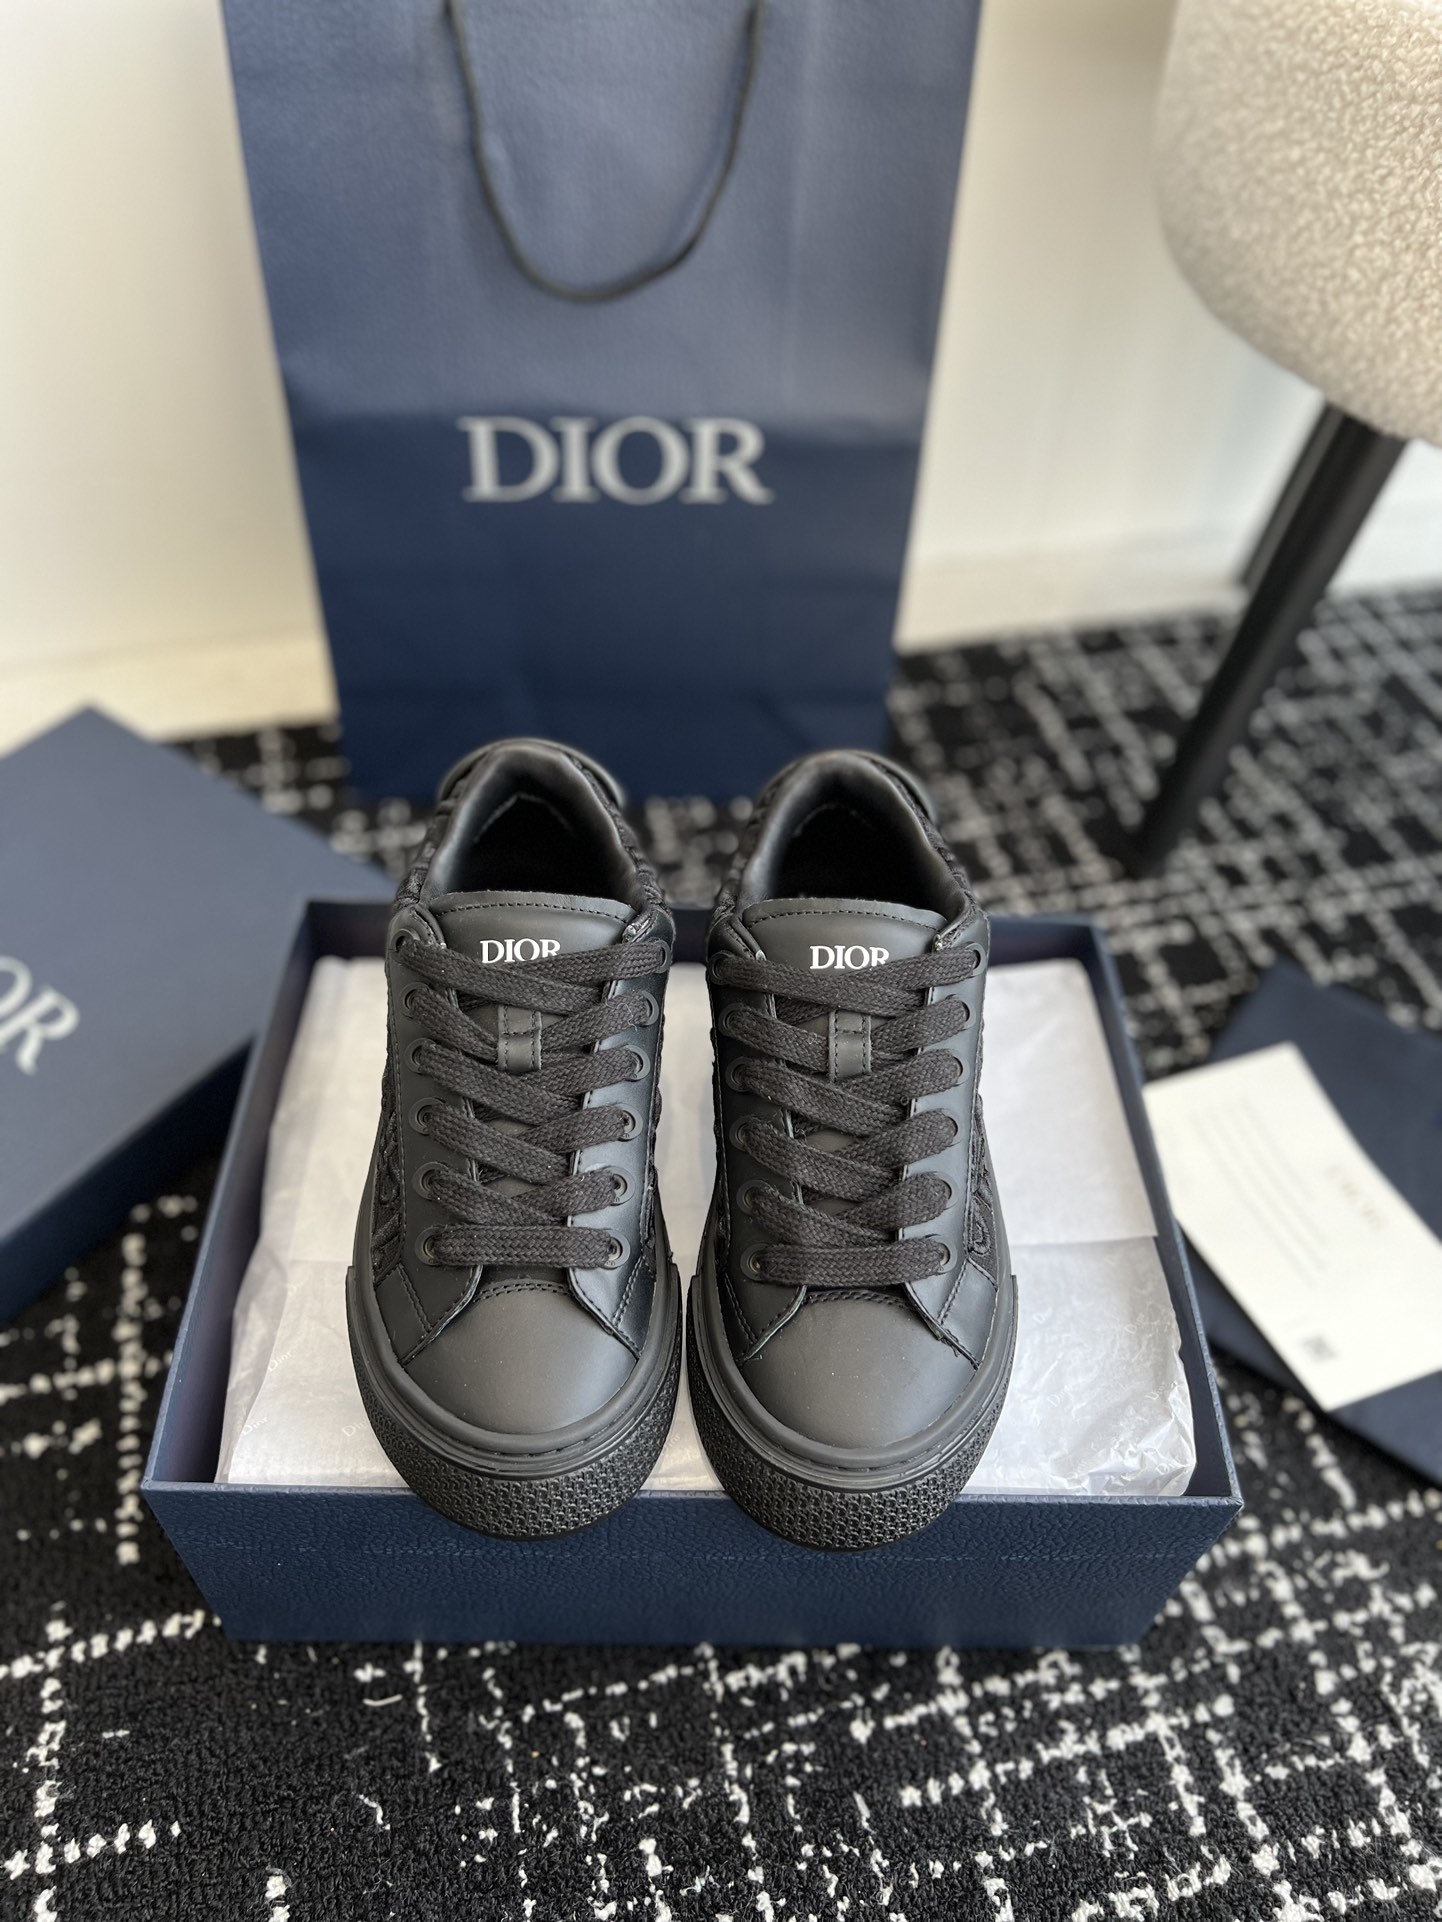 Dior Buy Skateboard Shoes Sneakers Casual Shoes Unsurpassed Quality
 White Printing Horsehair Rubber Weave Oblique Casual